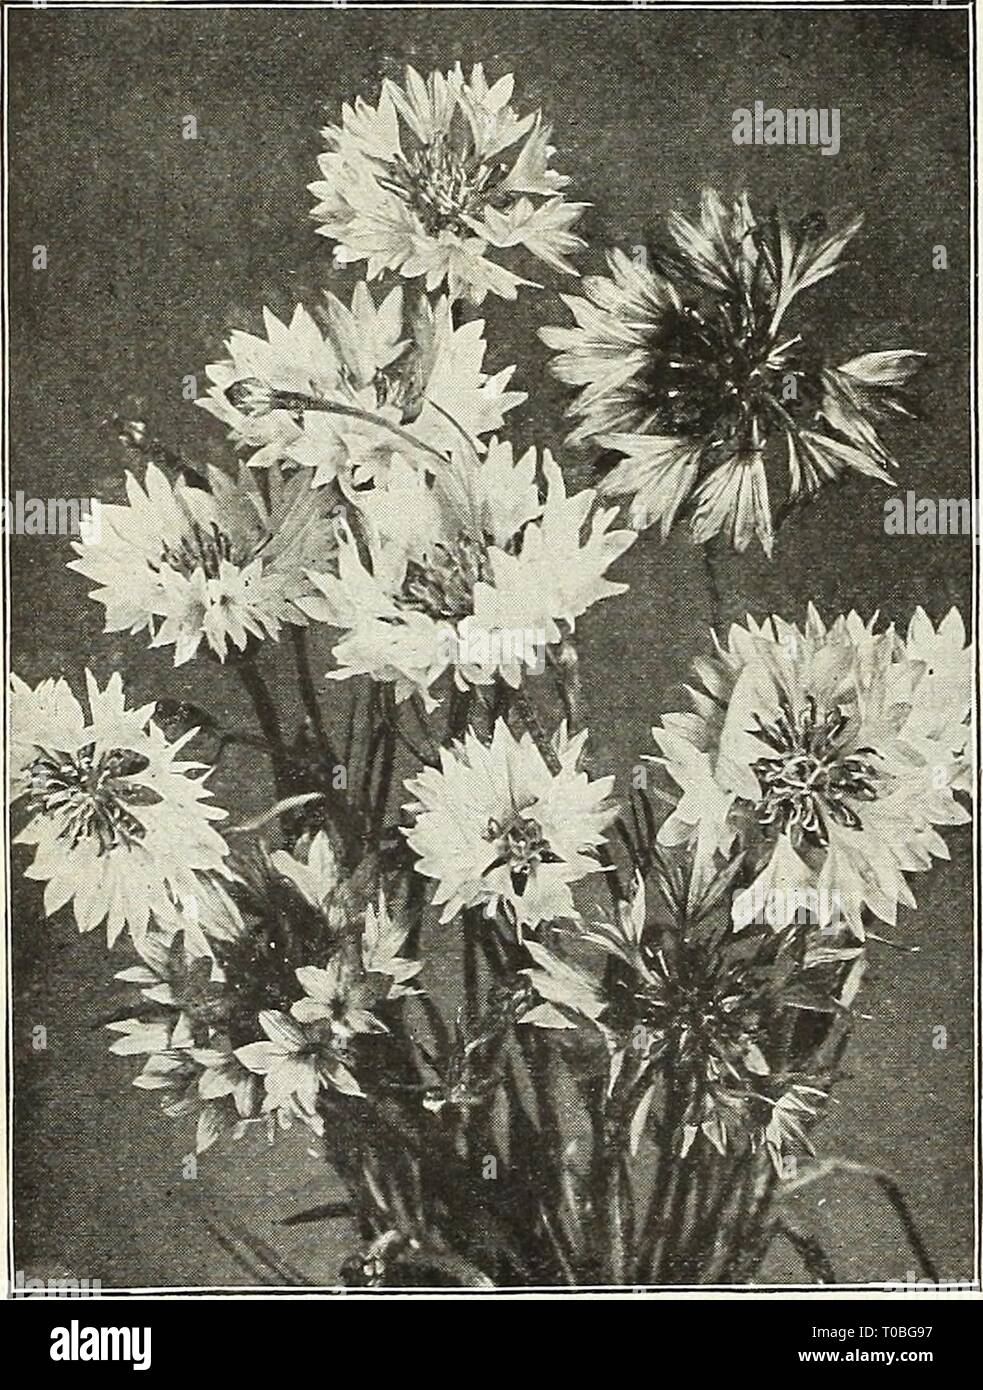 Dreer's garden book 1922 (1922) Dreer's garden book 1922 dreersgardenbook1922henr Year: 1922  78 /flEHByA-BREEIl^ RELIABLE FLOWER SEEDS, I CENTAUREAS Under this name is included sucli popular annuals as the Cornflower, Sweet Sultans, etc. They are favorites in all sec- lions of the country, are perfectly hardy, will grow and do well almost everywhere, and are much in demand as cut flowers. CORNFLOWERS (Centaurea Cyanus) These are also known as Bachelor's Buttons, Blue Bottle, Ragged Sailor, Bluet and sometimes as Ragged Robin, but which name belongs to one of the Lychnis and frequently re- sul Stock Photo